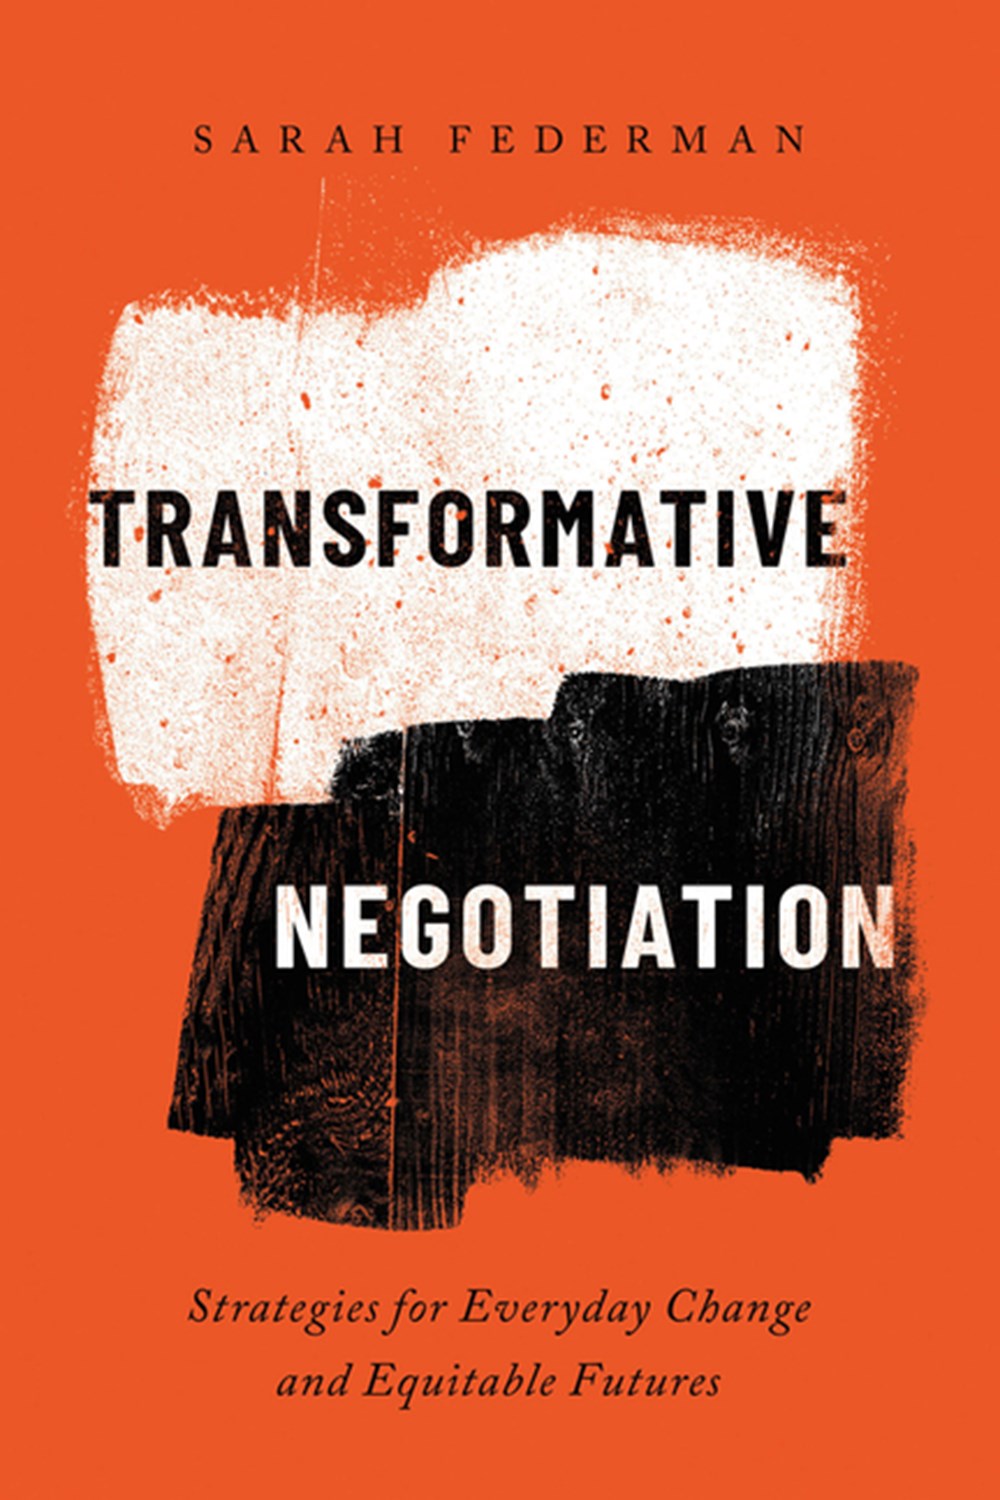 Transformative Negotiation: Strategies for Everyday Change and Equitable Futures